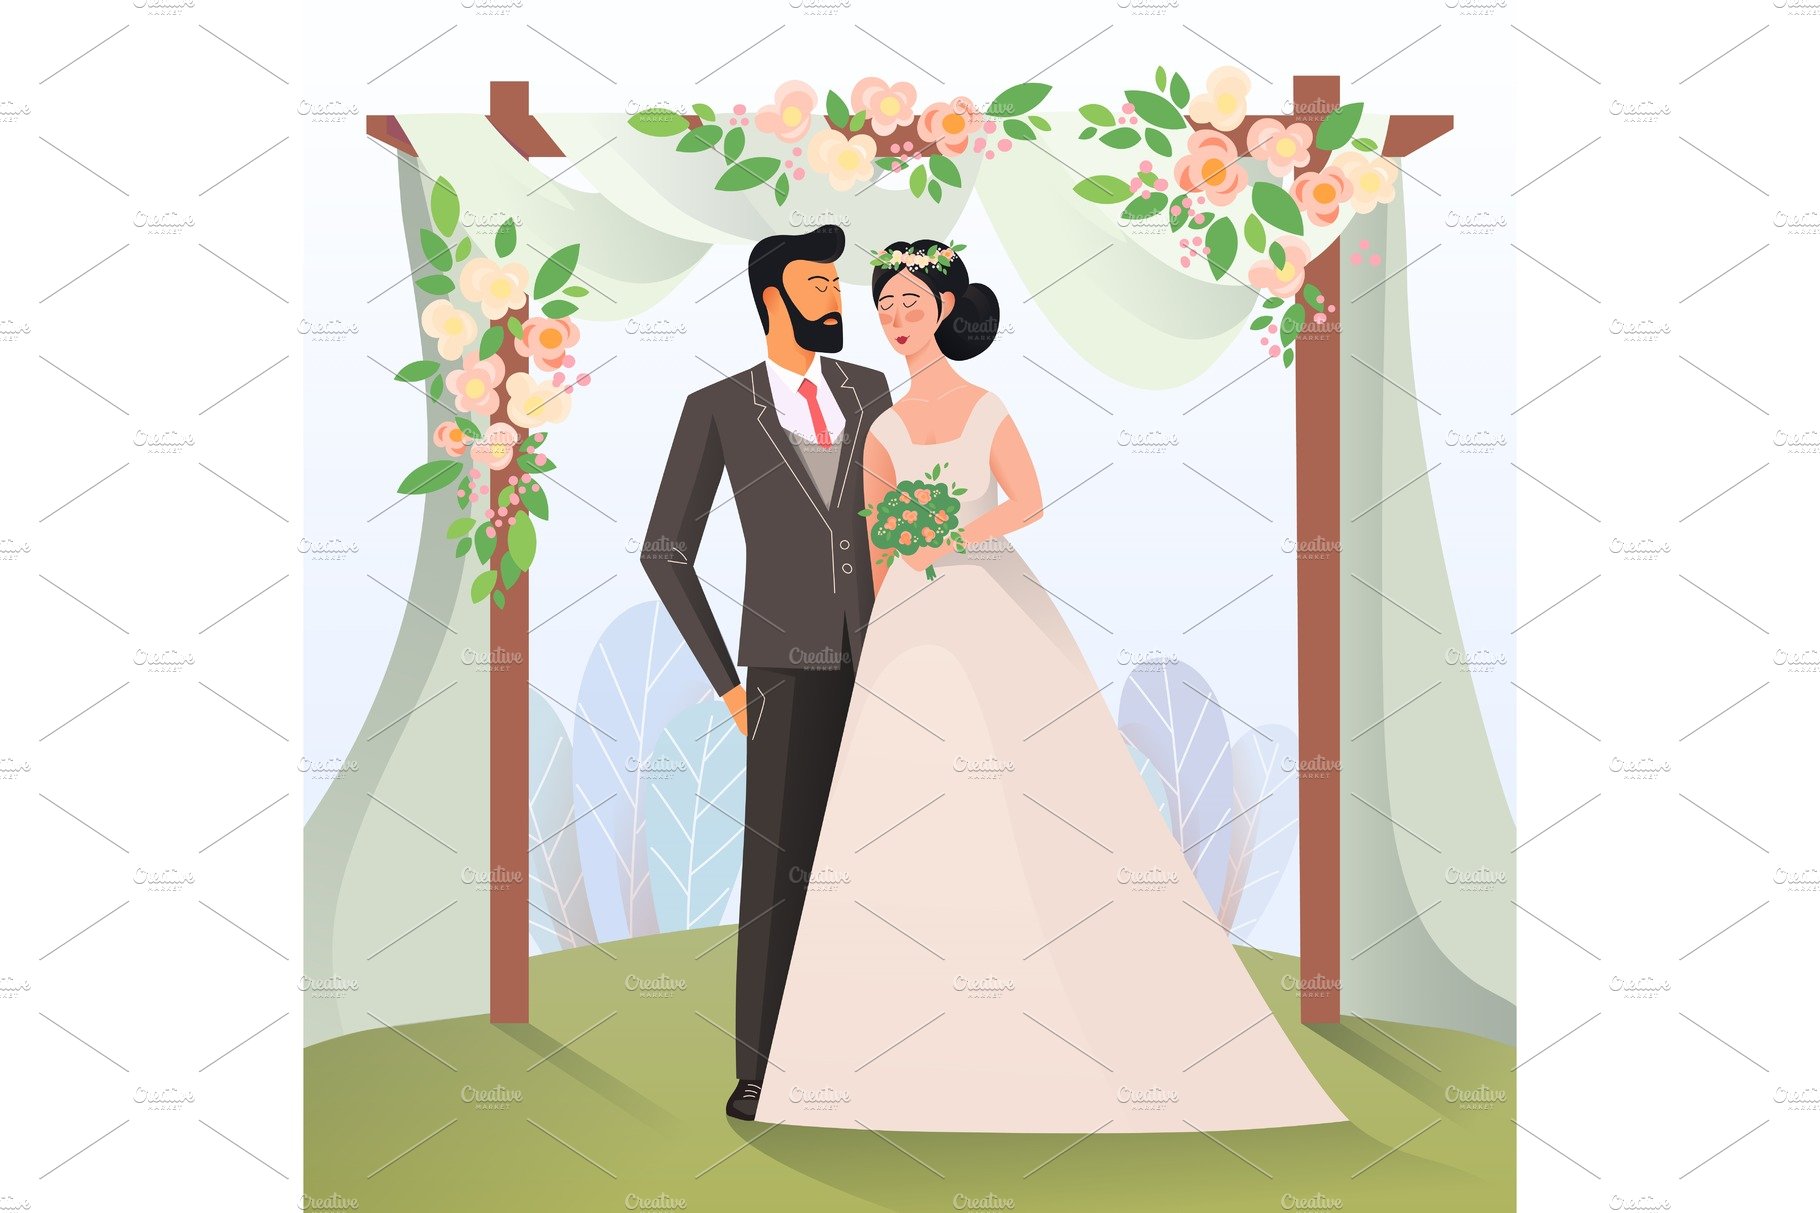 Man and woman having wedding cover image.